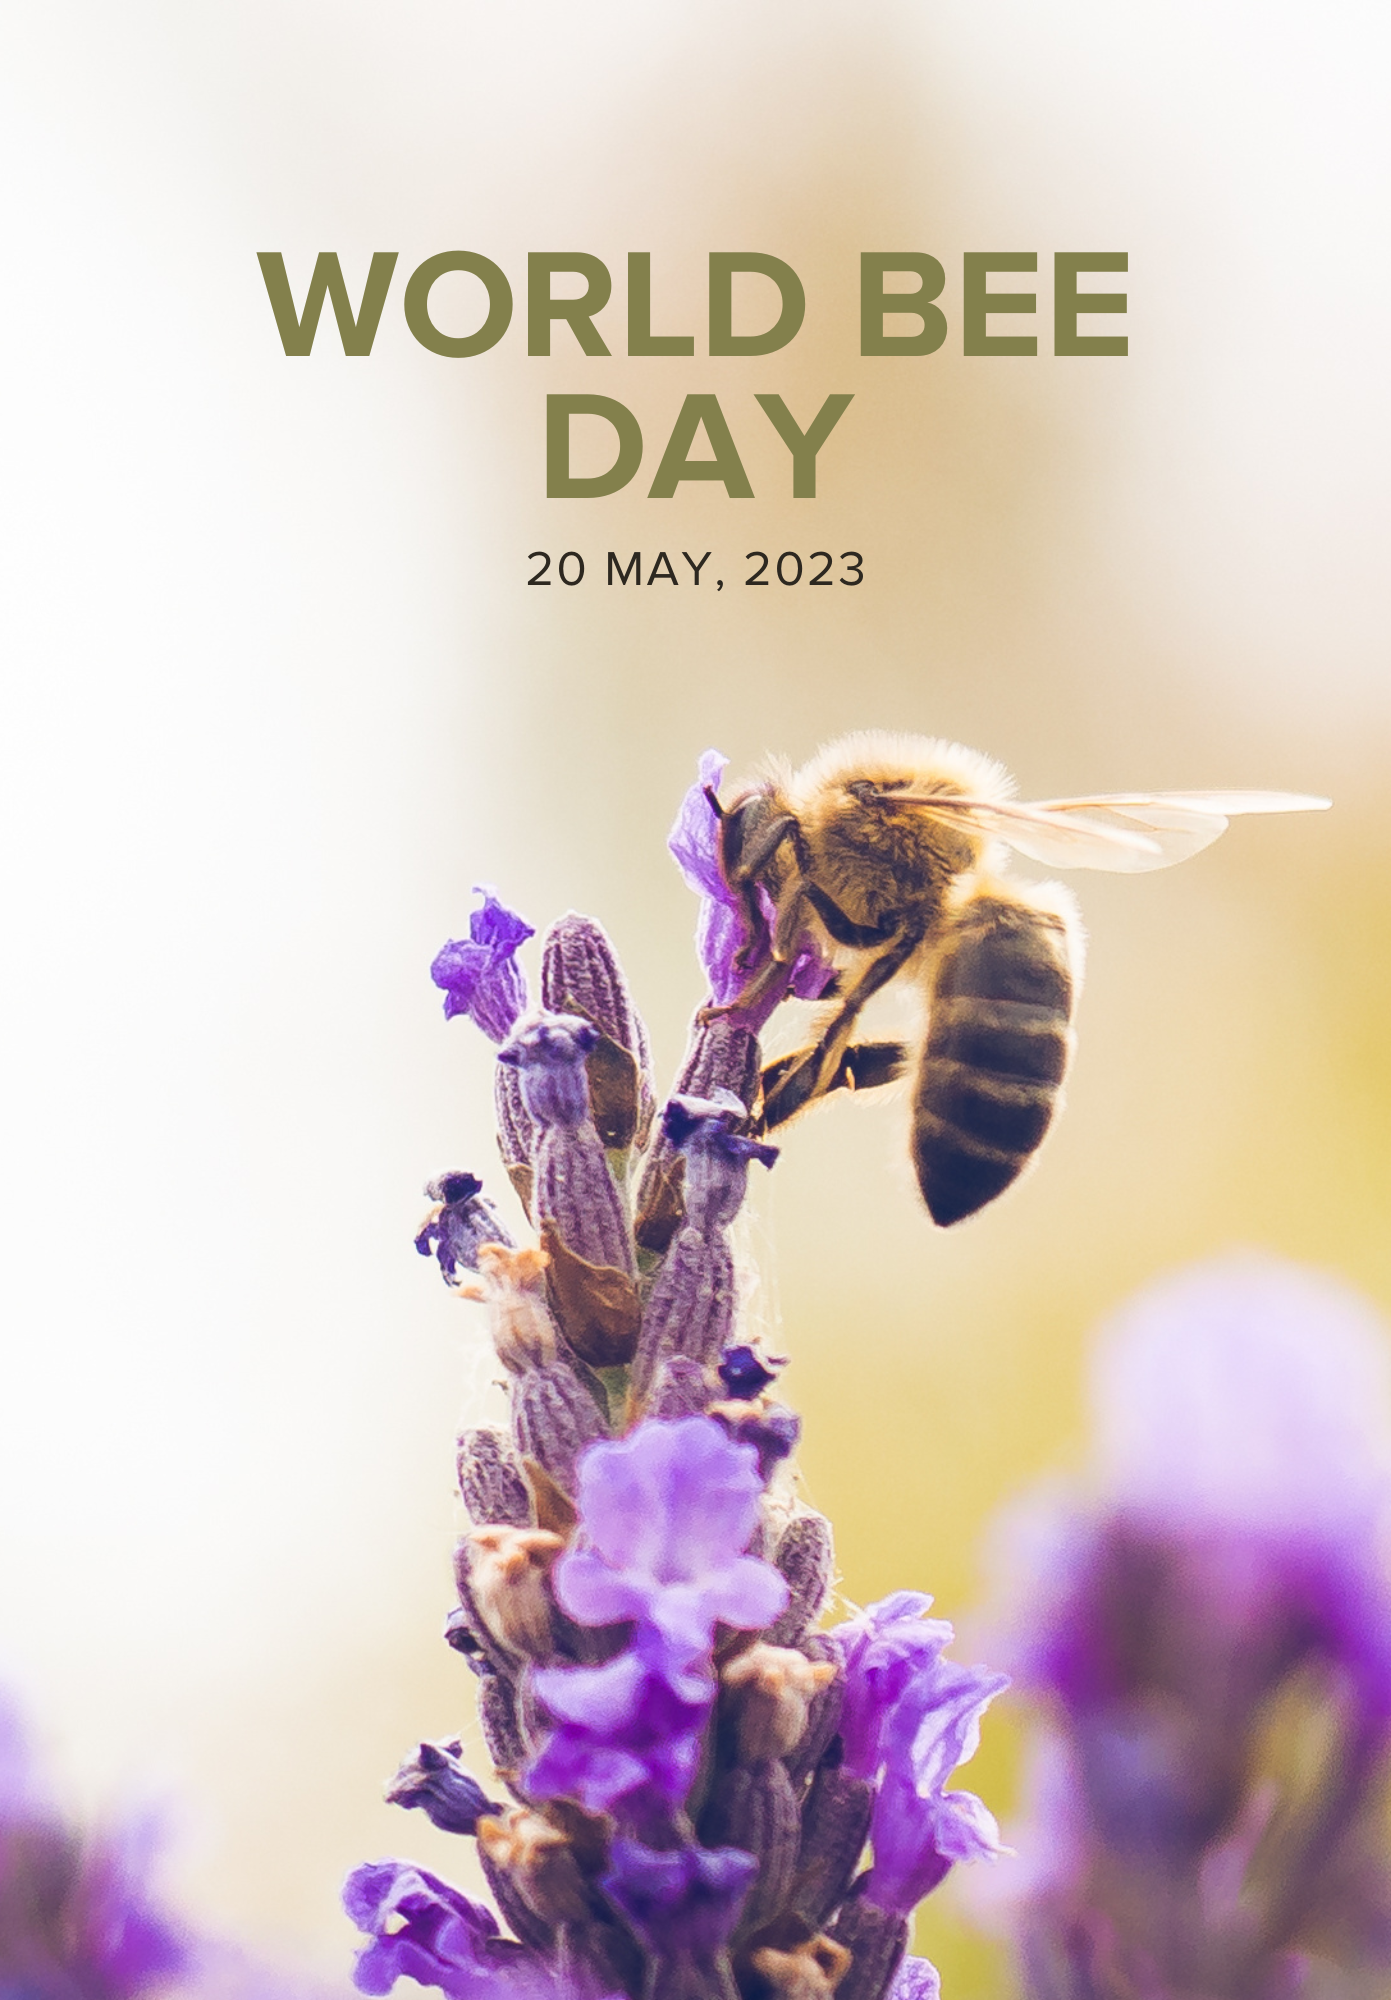 It’s World Bee Day, Let's Save the Bees! 💚🐝🌍